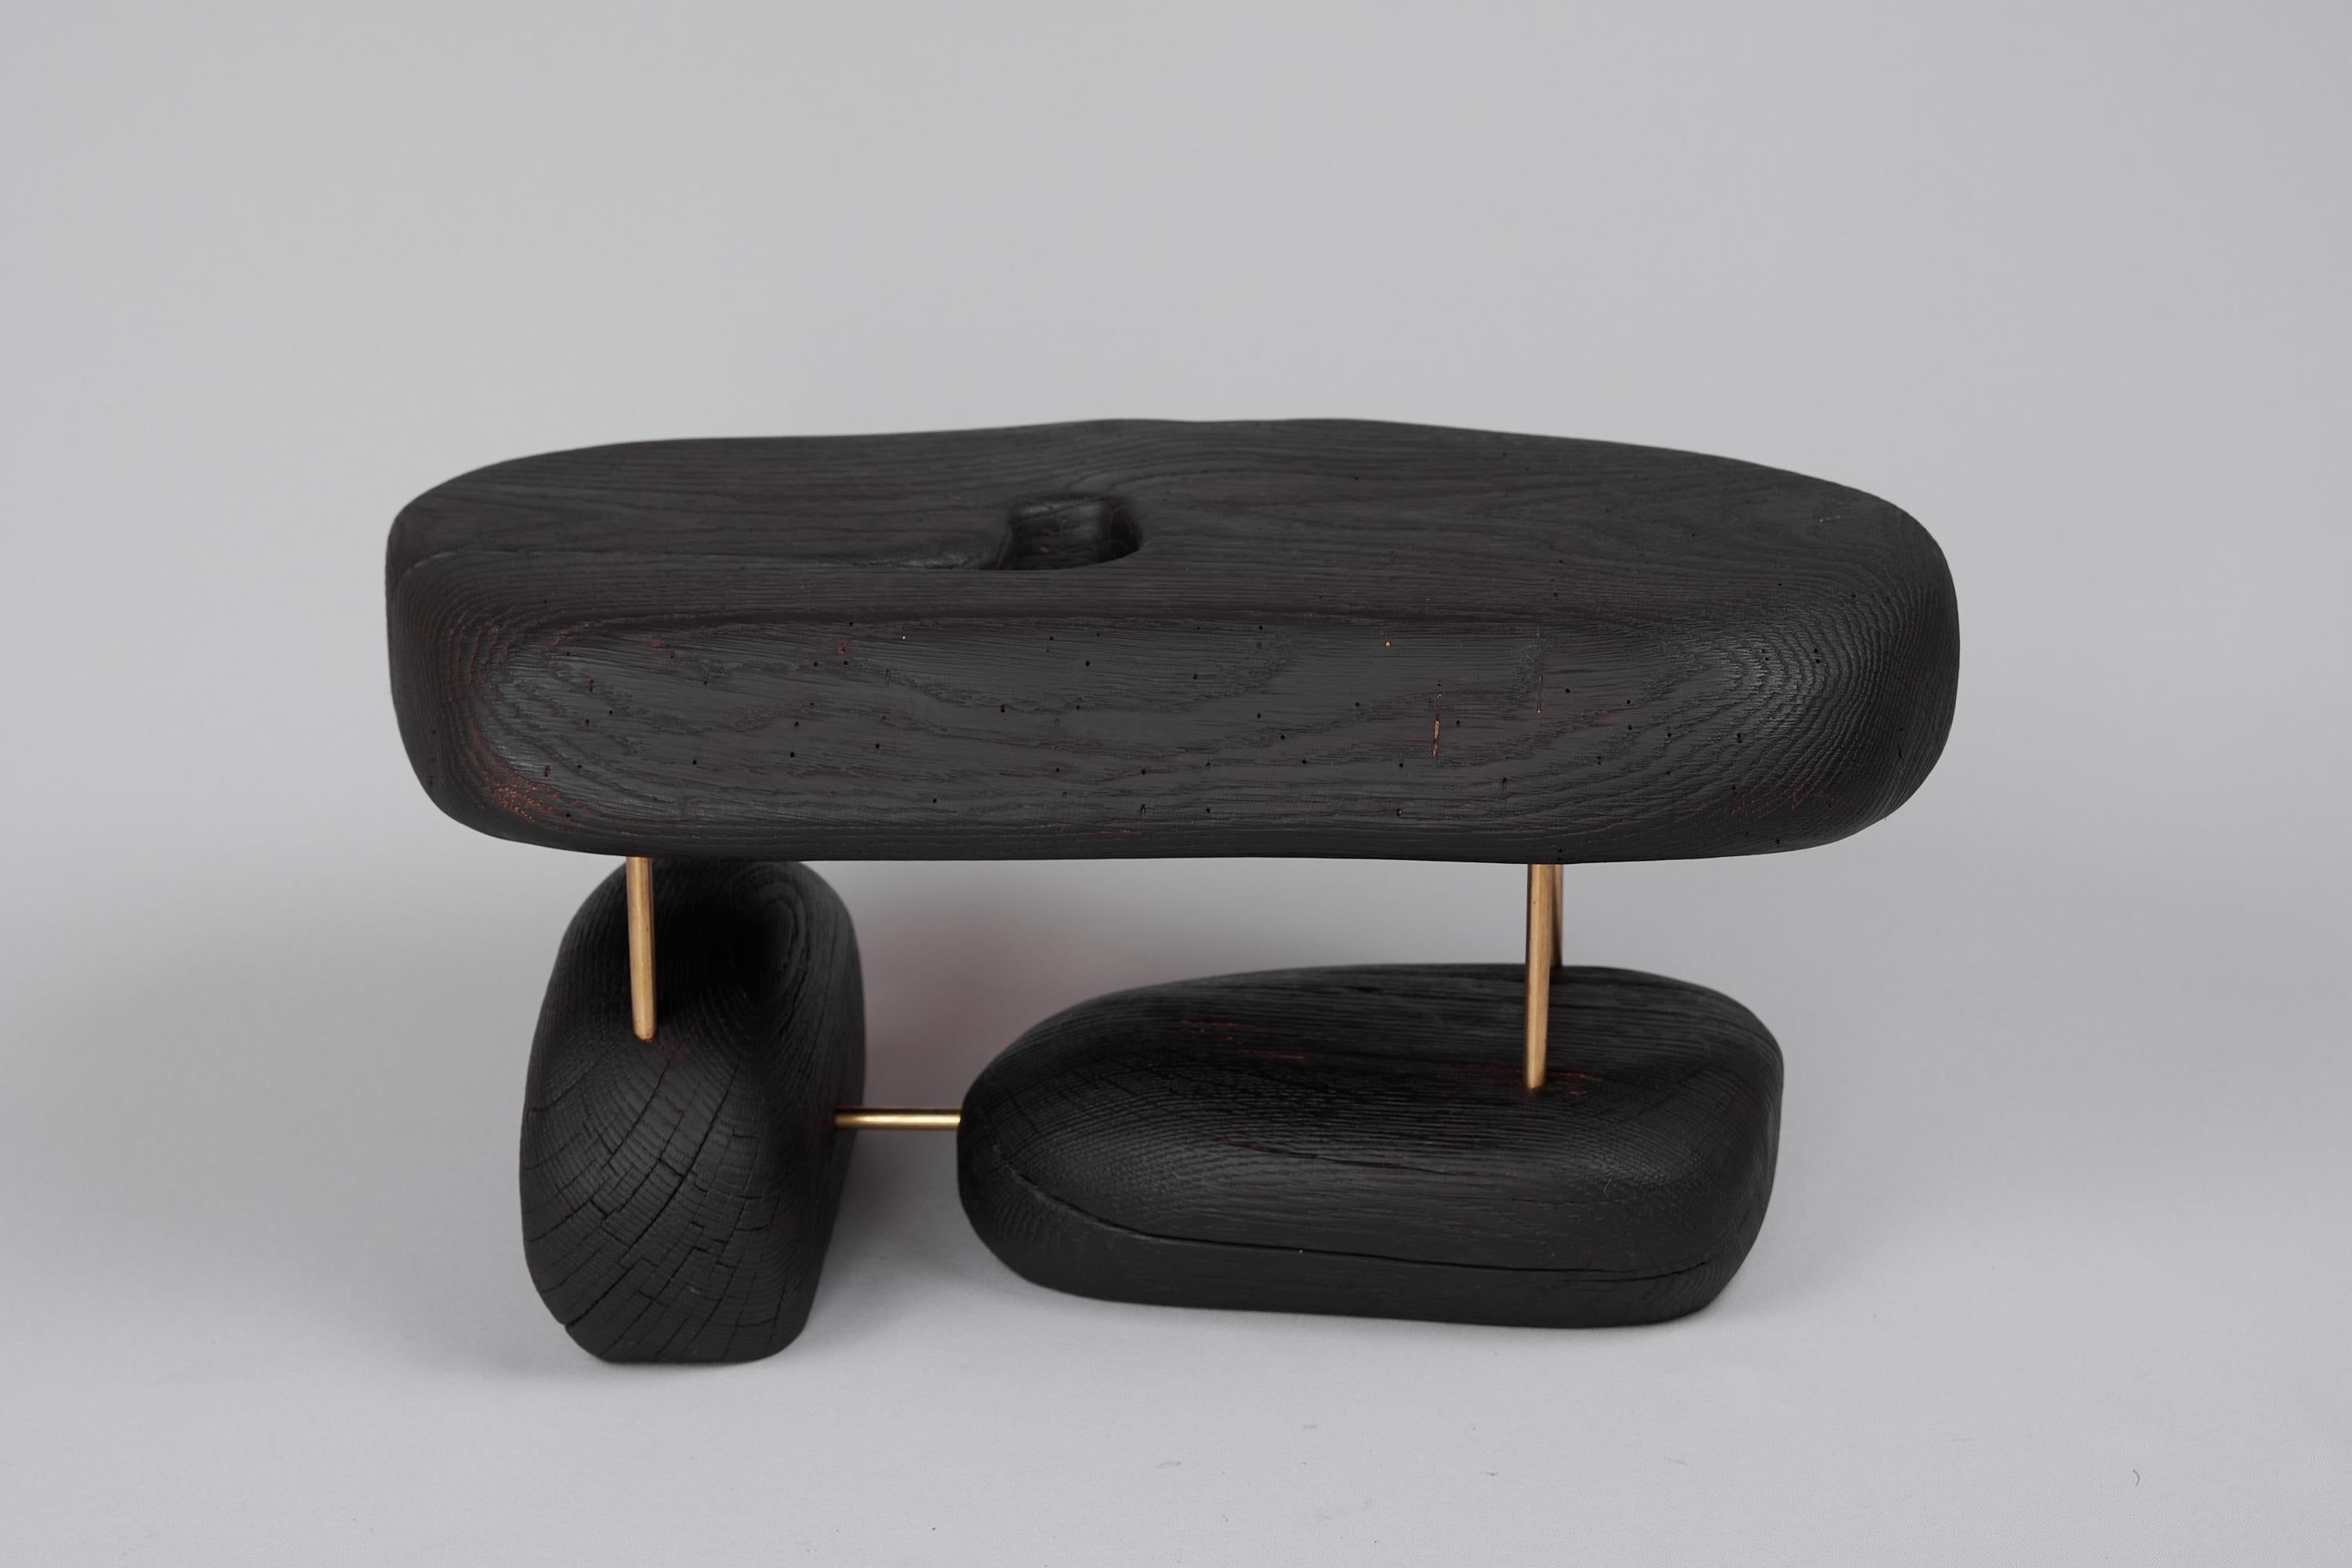 Unique wooden functional sculpture usable as a multifunctional piece such as a side table, stool, or decorative object. It is build in combination of high quality burnt oak with brass, and protected with the highest quality oils, ensuring durability